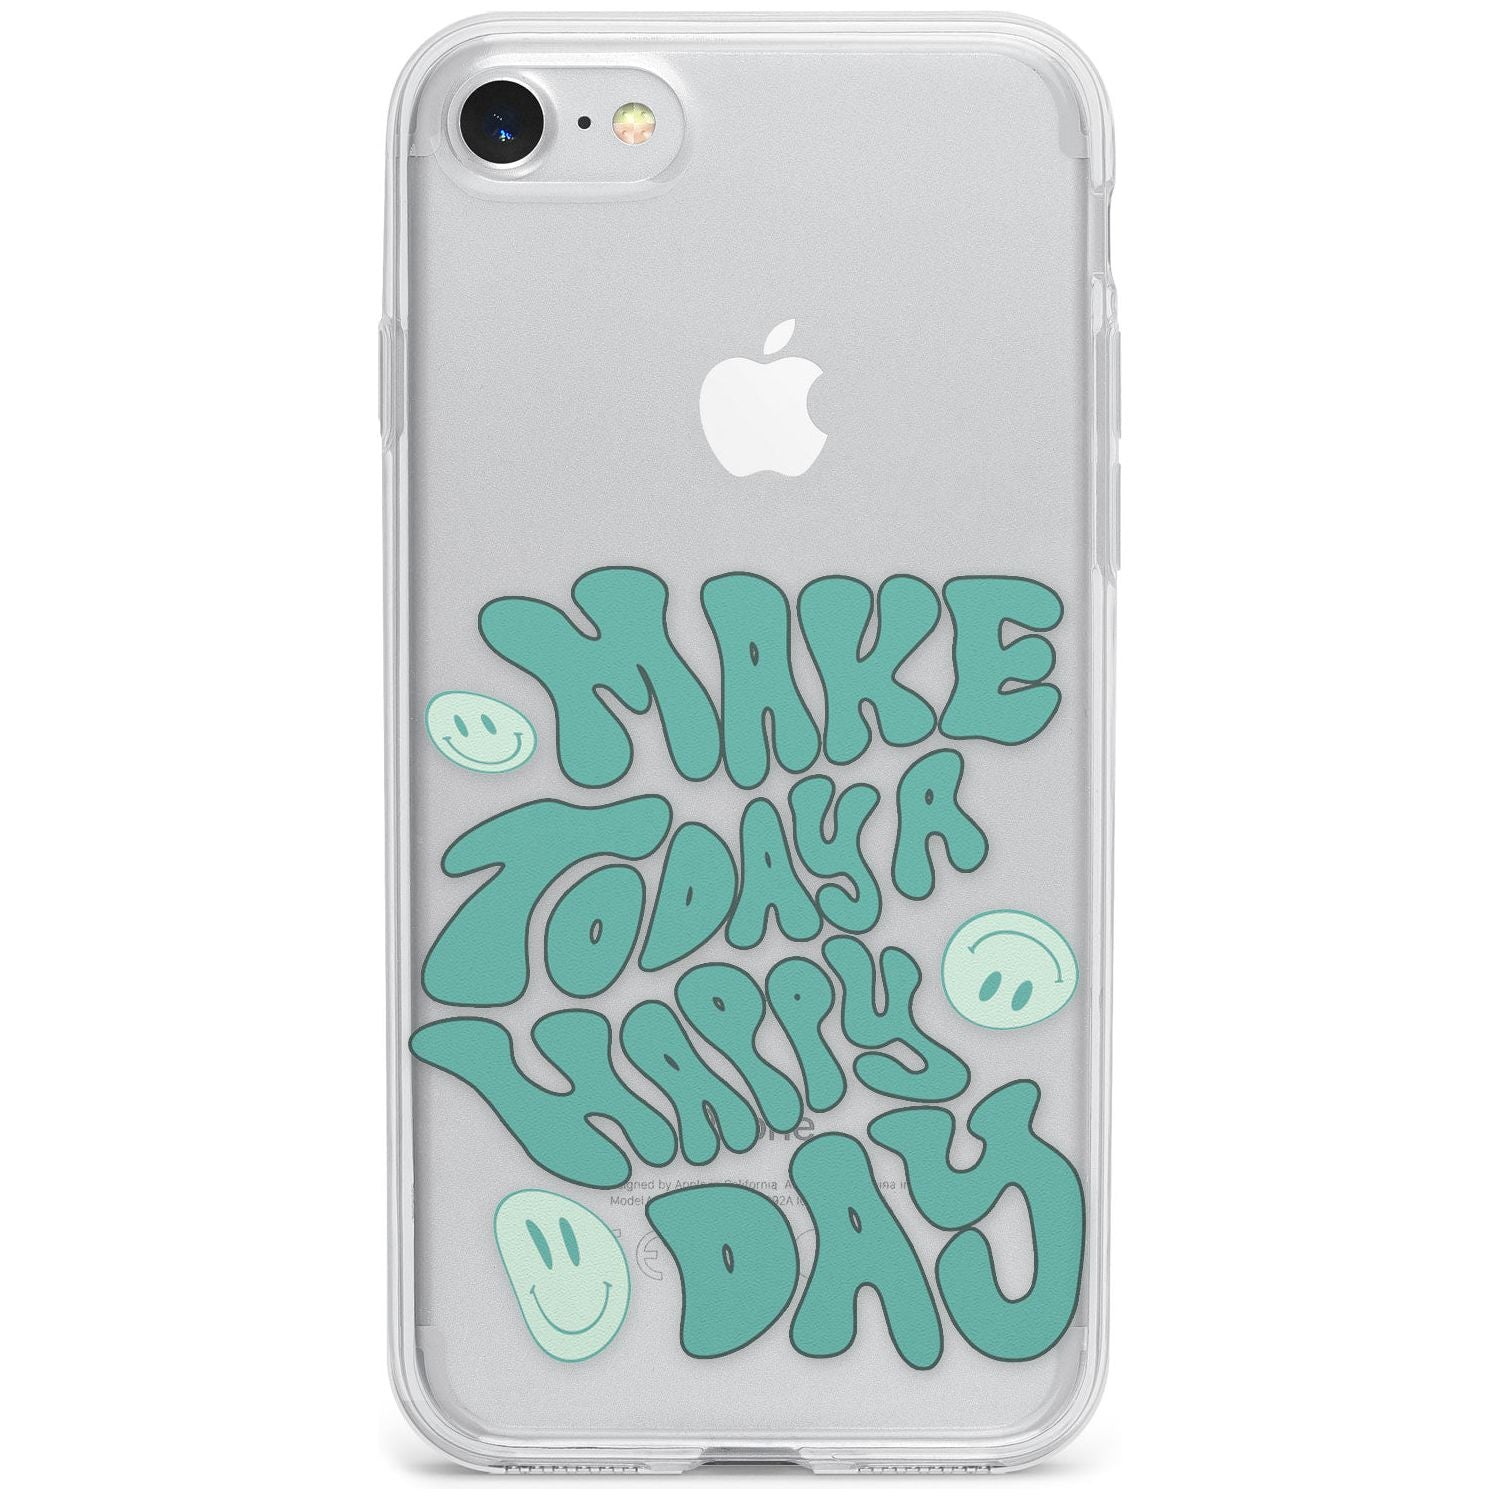 Moons & Clouds Phone Case for iPhone SE